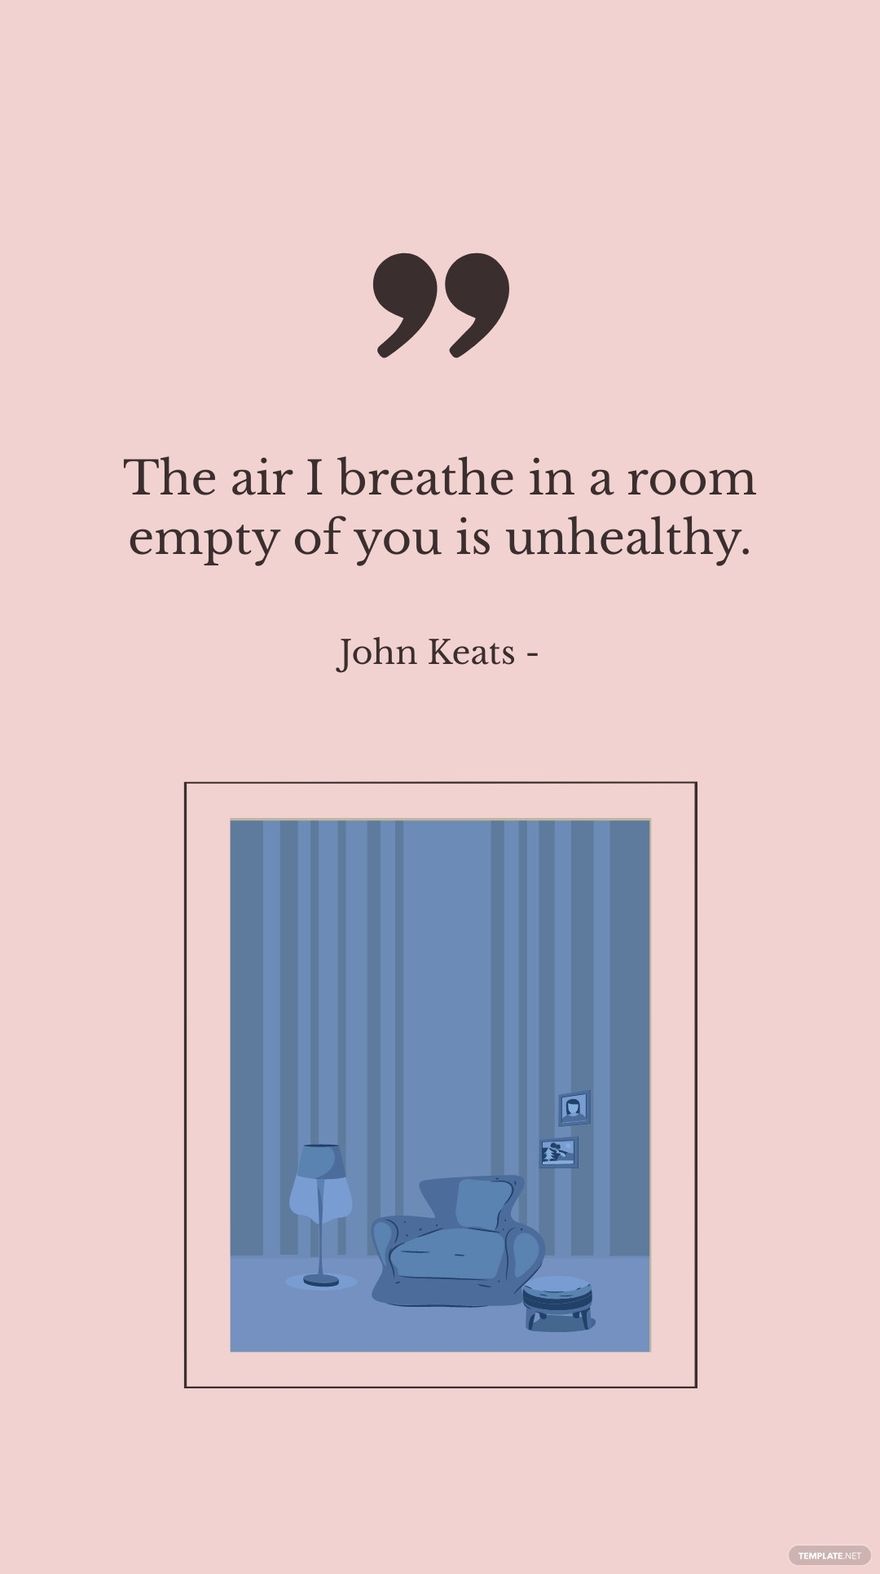 John Keats - The air I breathe in a room empty of you is unhealthy.